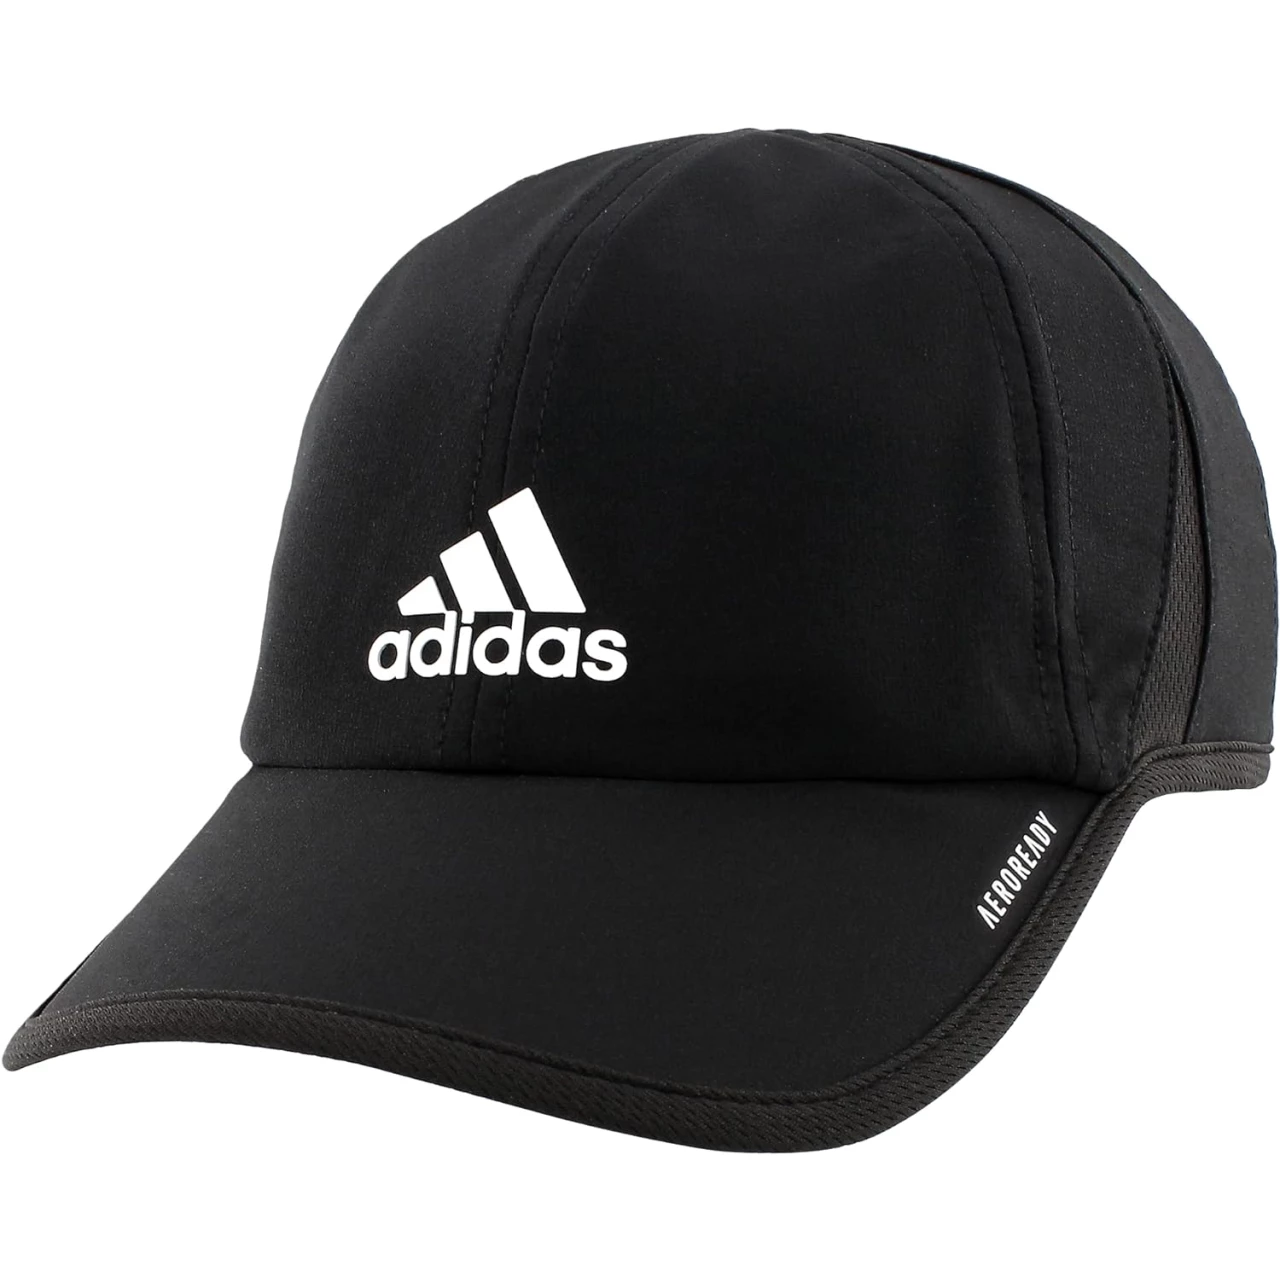 adidas Men&rsquo;s Superlite Relaxed Fit Performance Hat